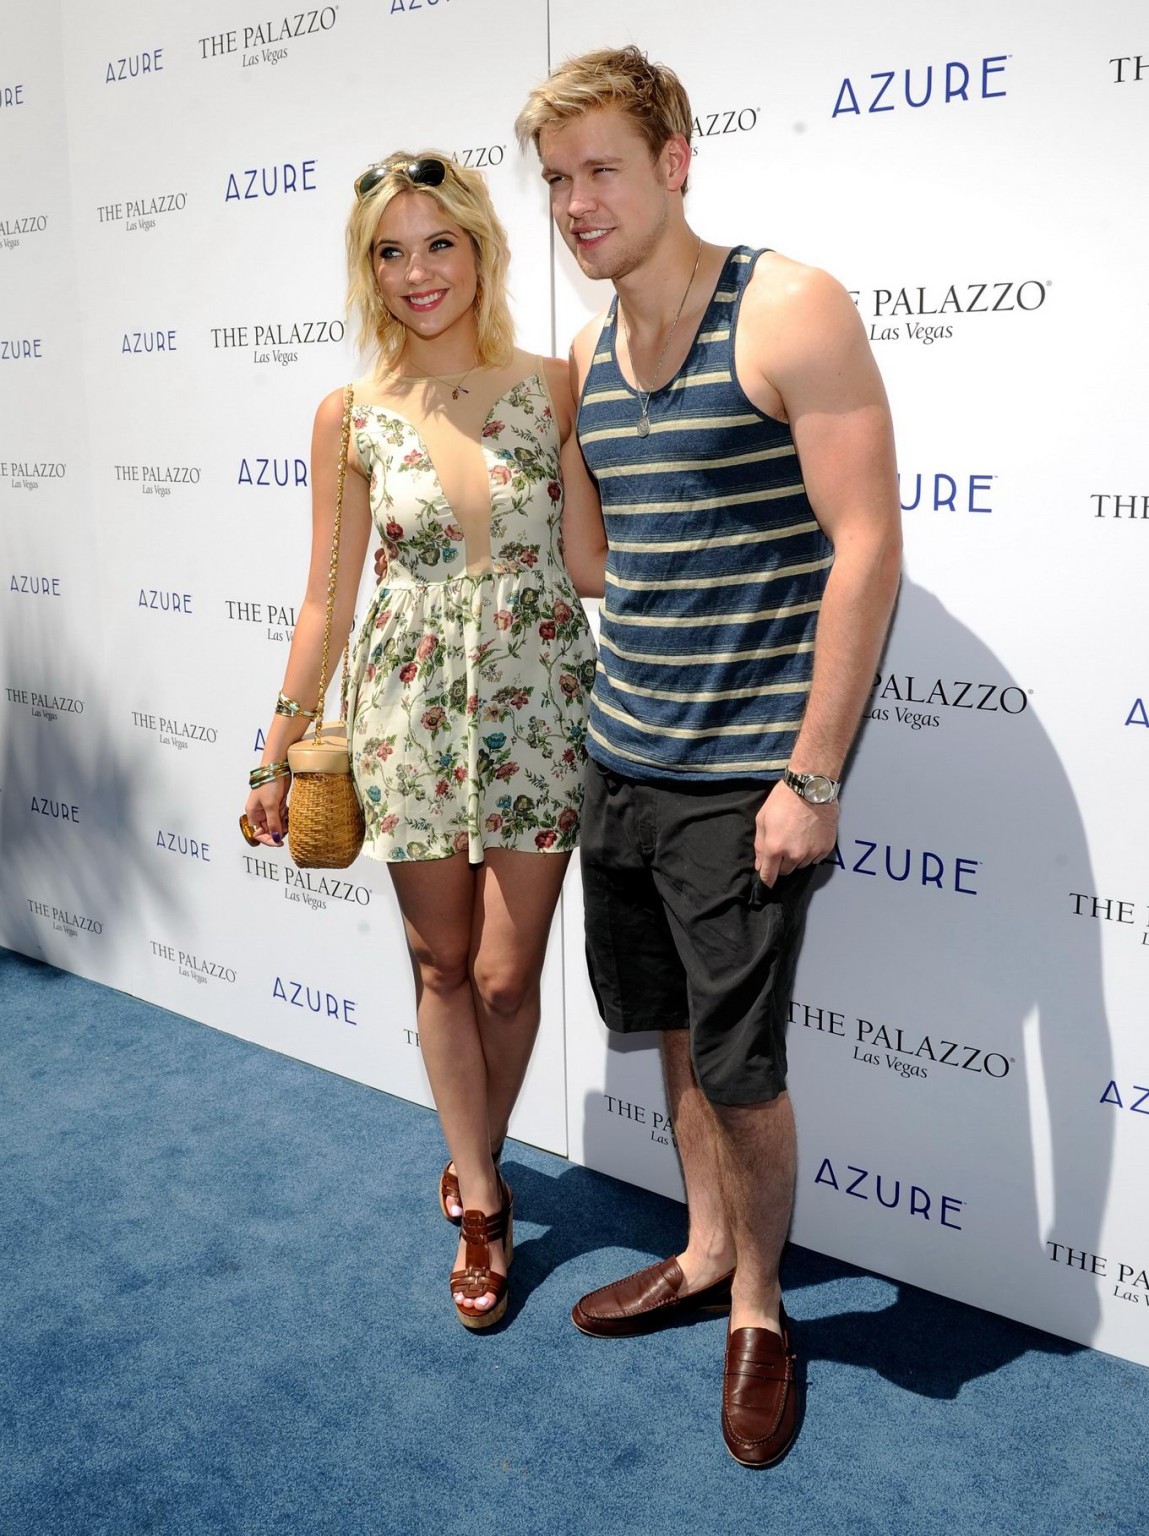 Ashley Benson cleavy showing side boob in a flower print mini dress at Azure poo #75253683